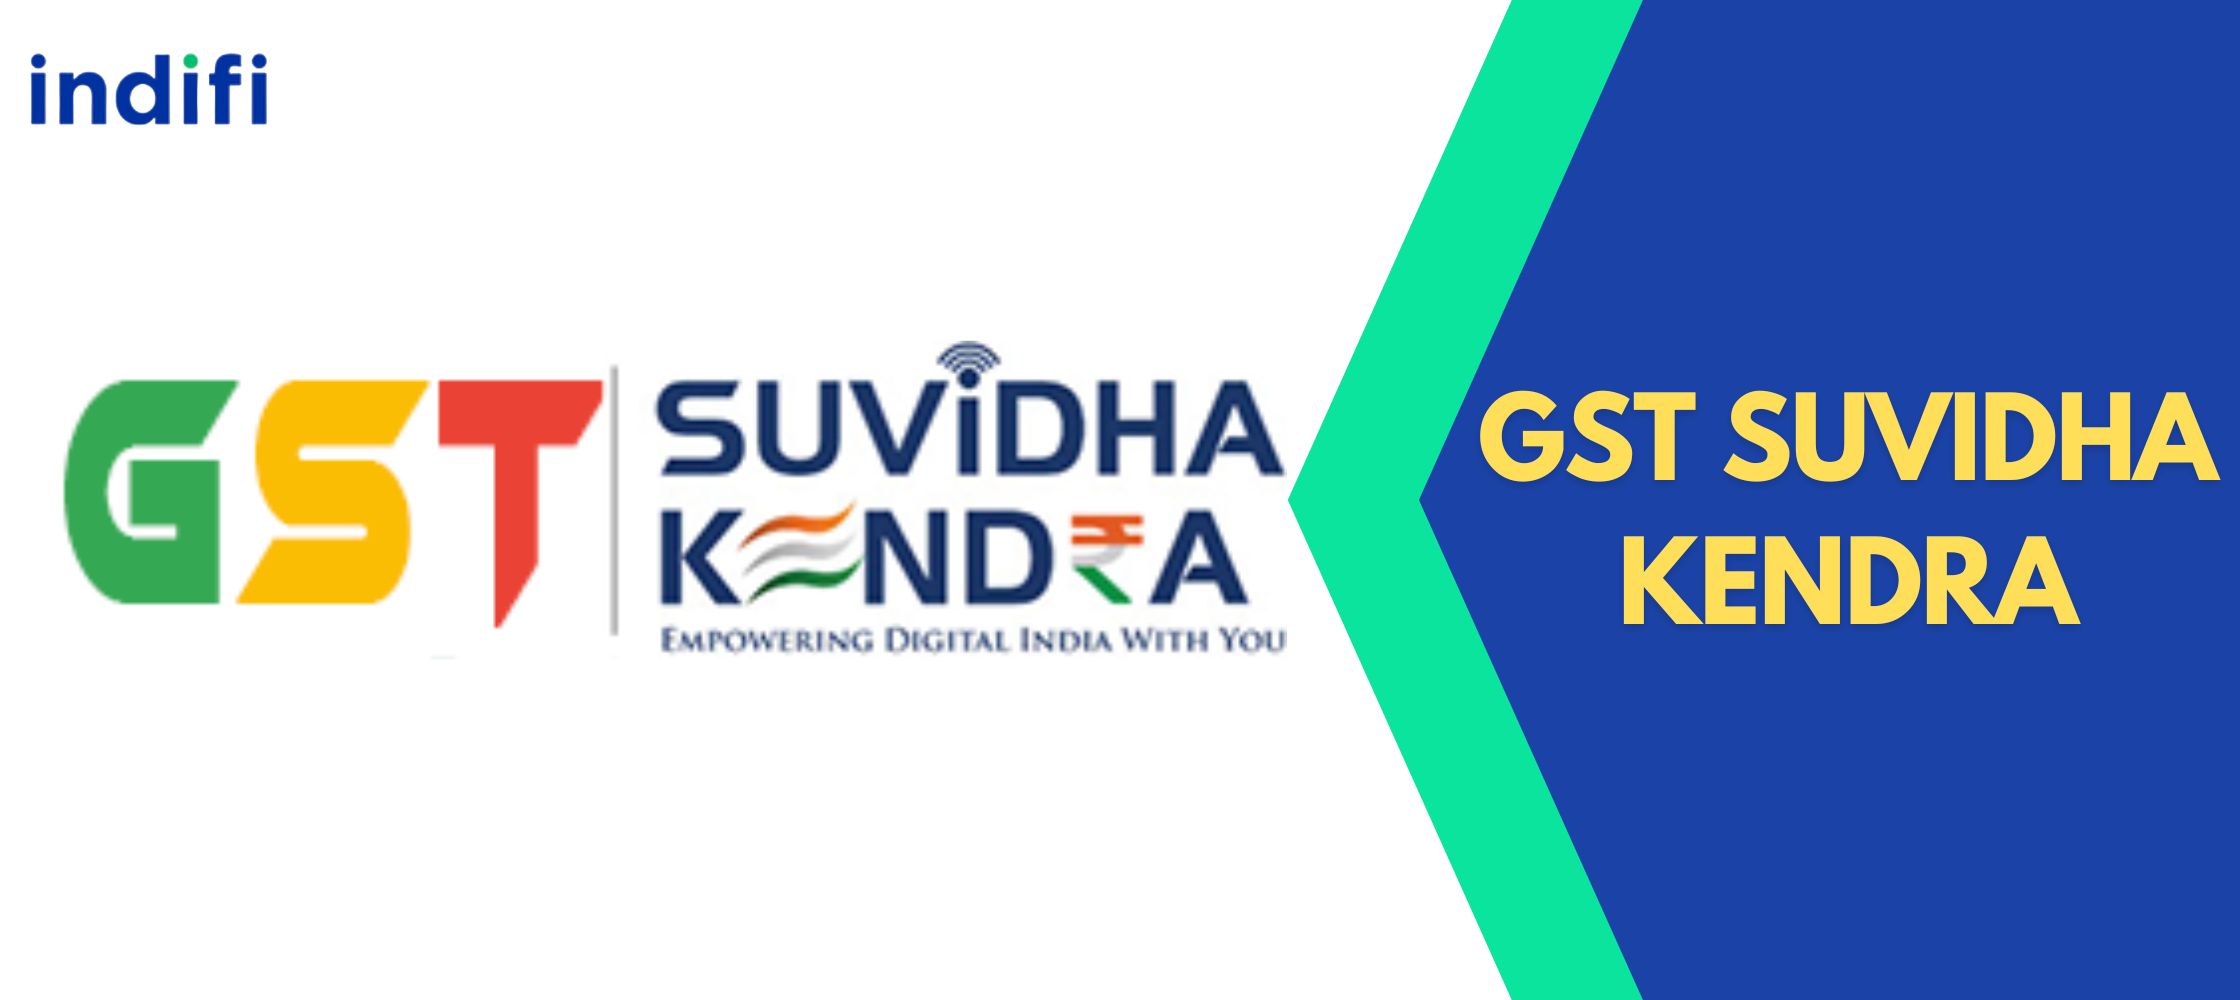 Get Details about GST Suvidha Kendra